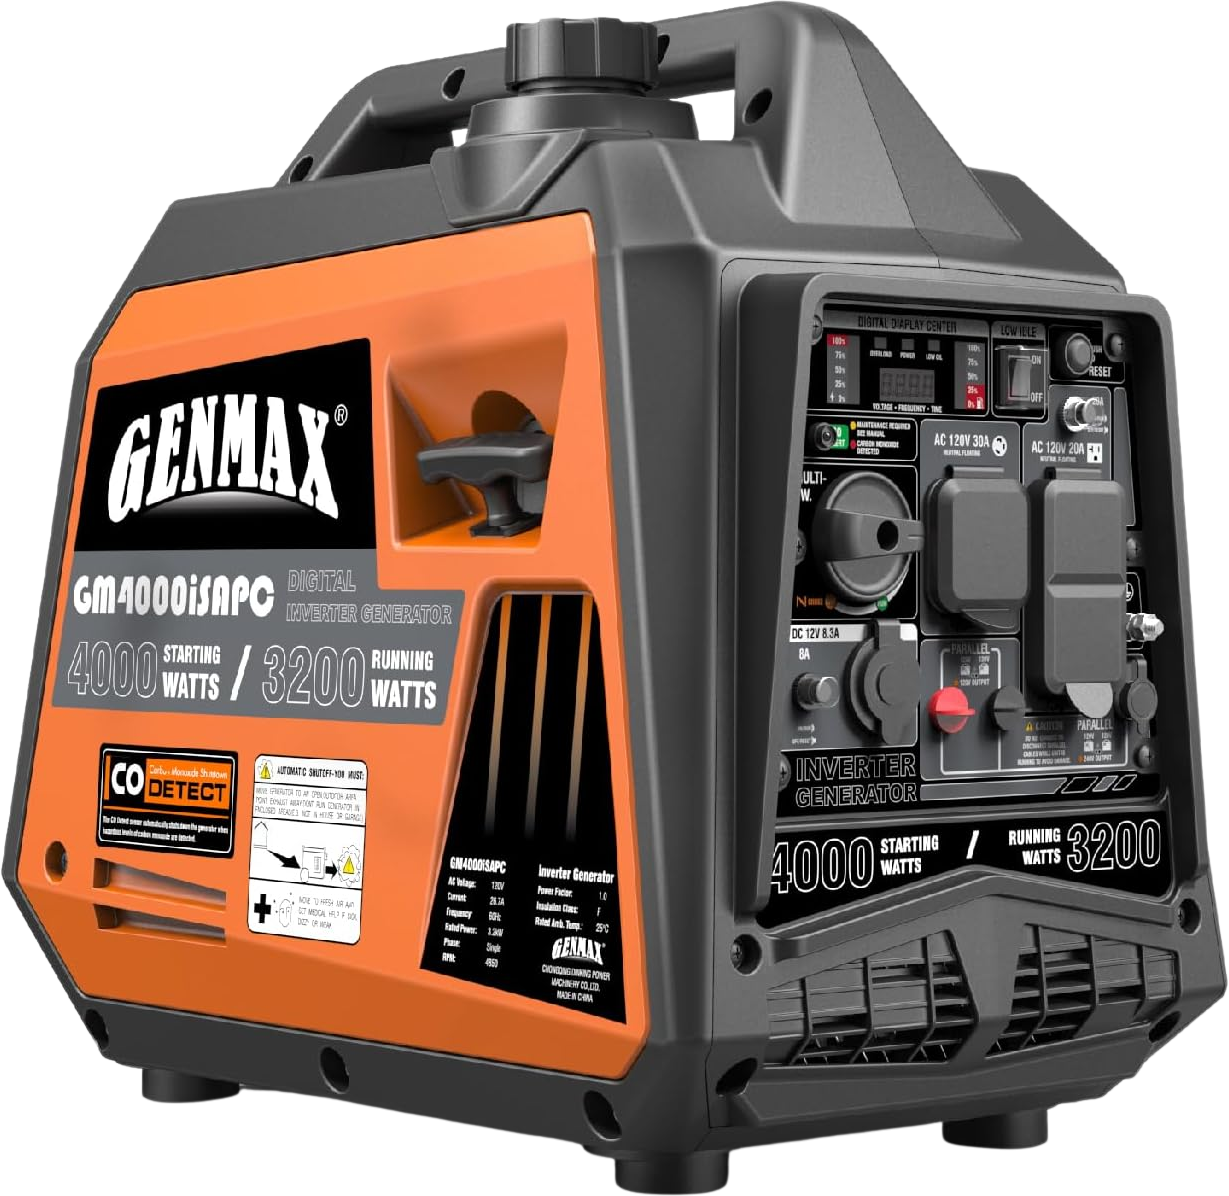 GENMAX, GENMAX GM4000iSAPC 3200W/4000W 26.7 Amp Gas Inverter Generator Parallel Ready with CO Detect New